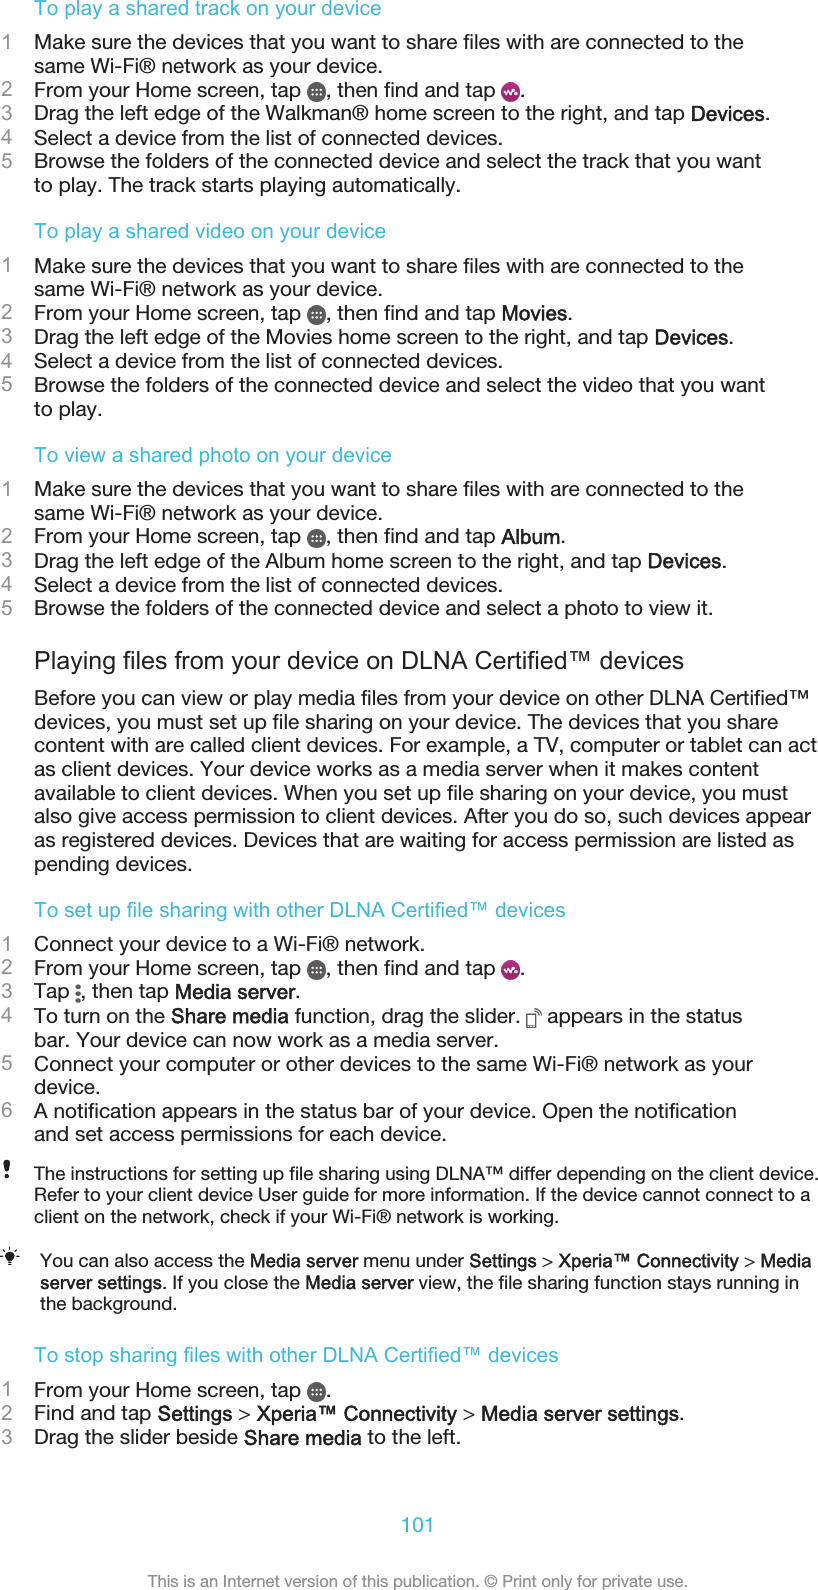 To play a shared track on your device1Make sure the devices that you want to share files with are connected to thesame Wi-Fi® network as your device.2From your Home screen, tap  , then find and tap  .3Drag the left edge of the Walkman® home screen to the right, and tap Devices.4Select a device from the list of connected devices.5Browse the folders of the connected device and select the track that you wantto play. The track starts playing automatically.To play a shared video on your device1Make sure the devices that you want to share files with are connected to thesame Wi-Fi® network as your device.2From your Home screen, tap  , then find and tap Movies.3Drag the left edge of the Movies home screen to the right, and tap Devices.4Select a device from the list of connected devices.5Browse the folders of the connected device and select the video that you wantto play.To view a shared photo on your device1Make sure the devices that you want to share files with are connected to thesame Wi-Fi® network as your device.2From your Home screen, tap  , then find and tap Album.3Drag the left edge of the Album home screen to the right, and tap Devices.4Select a device from the list of connected devices.5Browse the folders of the connected device and select a photo to view it.Playing files from your device on DLNA Certified™ devicesBefore you can view or play media files from your device on other DLNA Certified™devices, you must set up file sharing on your device. The devices that you sharecontent with are called client devices. For example, a TV, computer or tablet can actas client devices. Your device works as a media server when it makes contentavailable to client devices. When you set up file sharing on your device, you mustalso give access permission to client devices. After you do so, such devices appearas registered devices. Devices that are waiting for access permission are listed aspending devices.To set up file sharing with other DLNA Certified™ devices1Connect your device to a Wi-Fi® network.2From your Home screen, tap  , then find and tap  .3Tap  , then tap Media server.4To turn on the Share media function, drag the slider.   appears in the statusbar. Your device can now work as a media server.5Connect your computer or other devices to the same Wi-Fi® network as yourdevice.6A notification appears in the status bar of your device. Open the notificationand set access permissions for each device.The instructions for setting up file sharing using DLNA™ differ depending on the client device.Refer to your client device User guide for more information. If the device cannot connect to aclient on the network, check if your Wi-Fi® network is working.You can also access the Media server menu under Settings &gt; Xperia™ Connectivity &gt; Mediaserver settings. If you close the Media server view, the file sharing function stays running inthe background.To stop sharing files with other DLNA Certified™ devices1From your Home screen, tap  .2Find and tap Settings &gt; Xperia™ Connectivity &gt; Media server settings.3Drag the slider beside Share media to the left.101This is an Internet version of this publication. © Print only for private use.